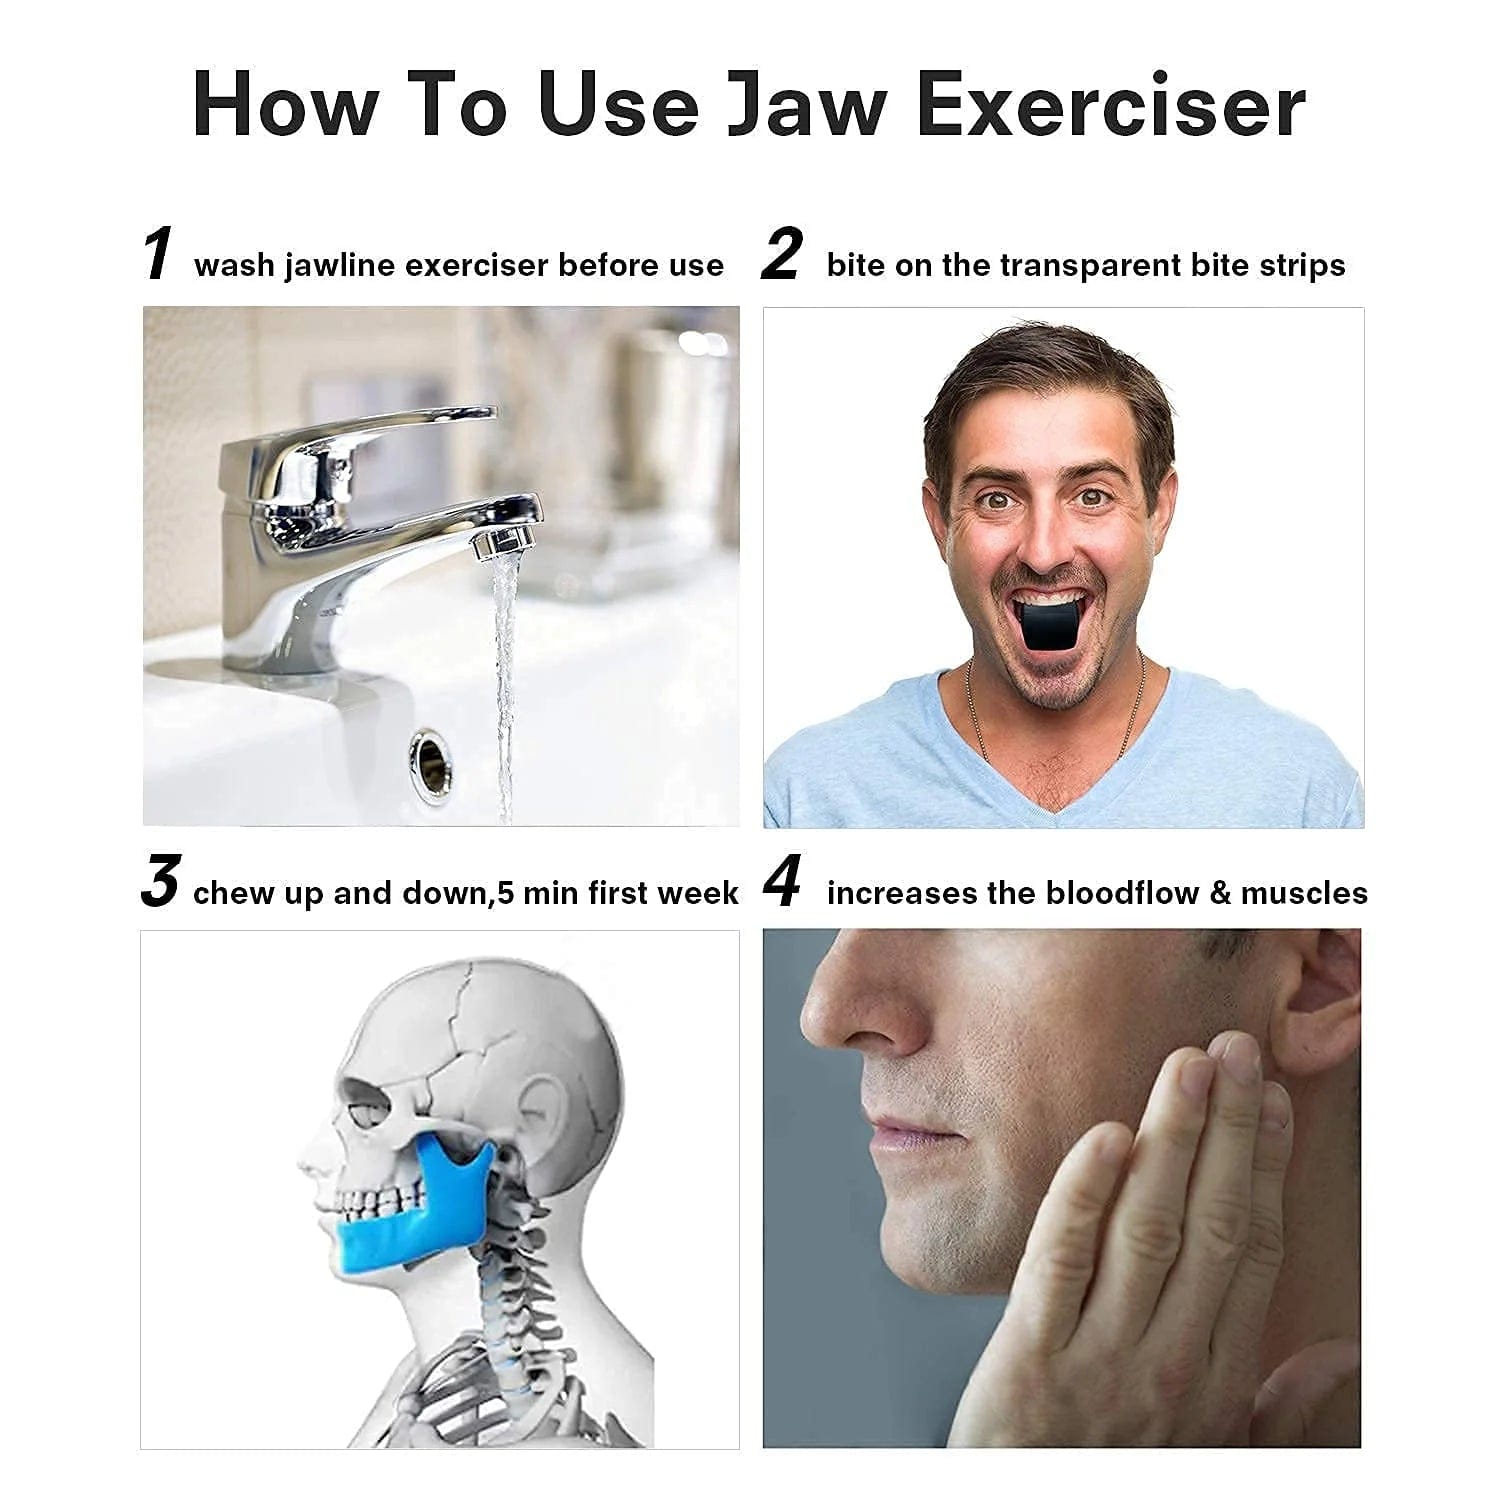 Jawline Exerciser (Pack of 2)